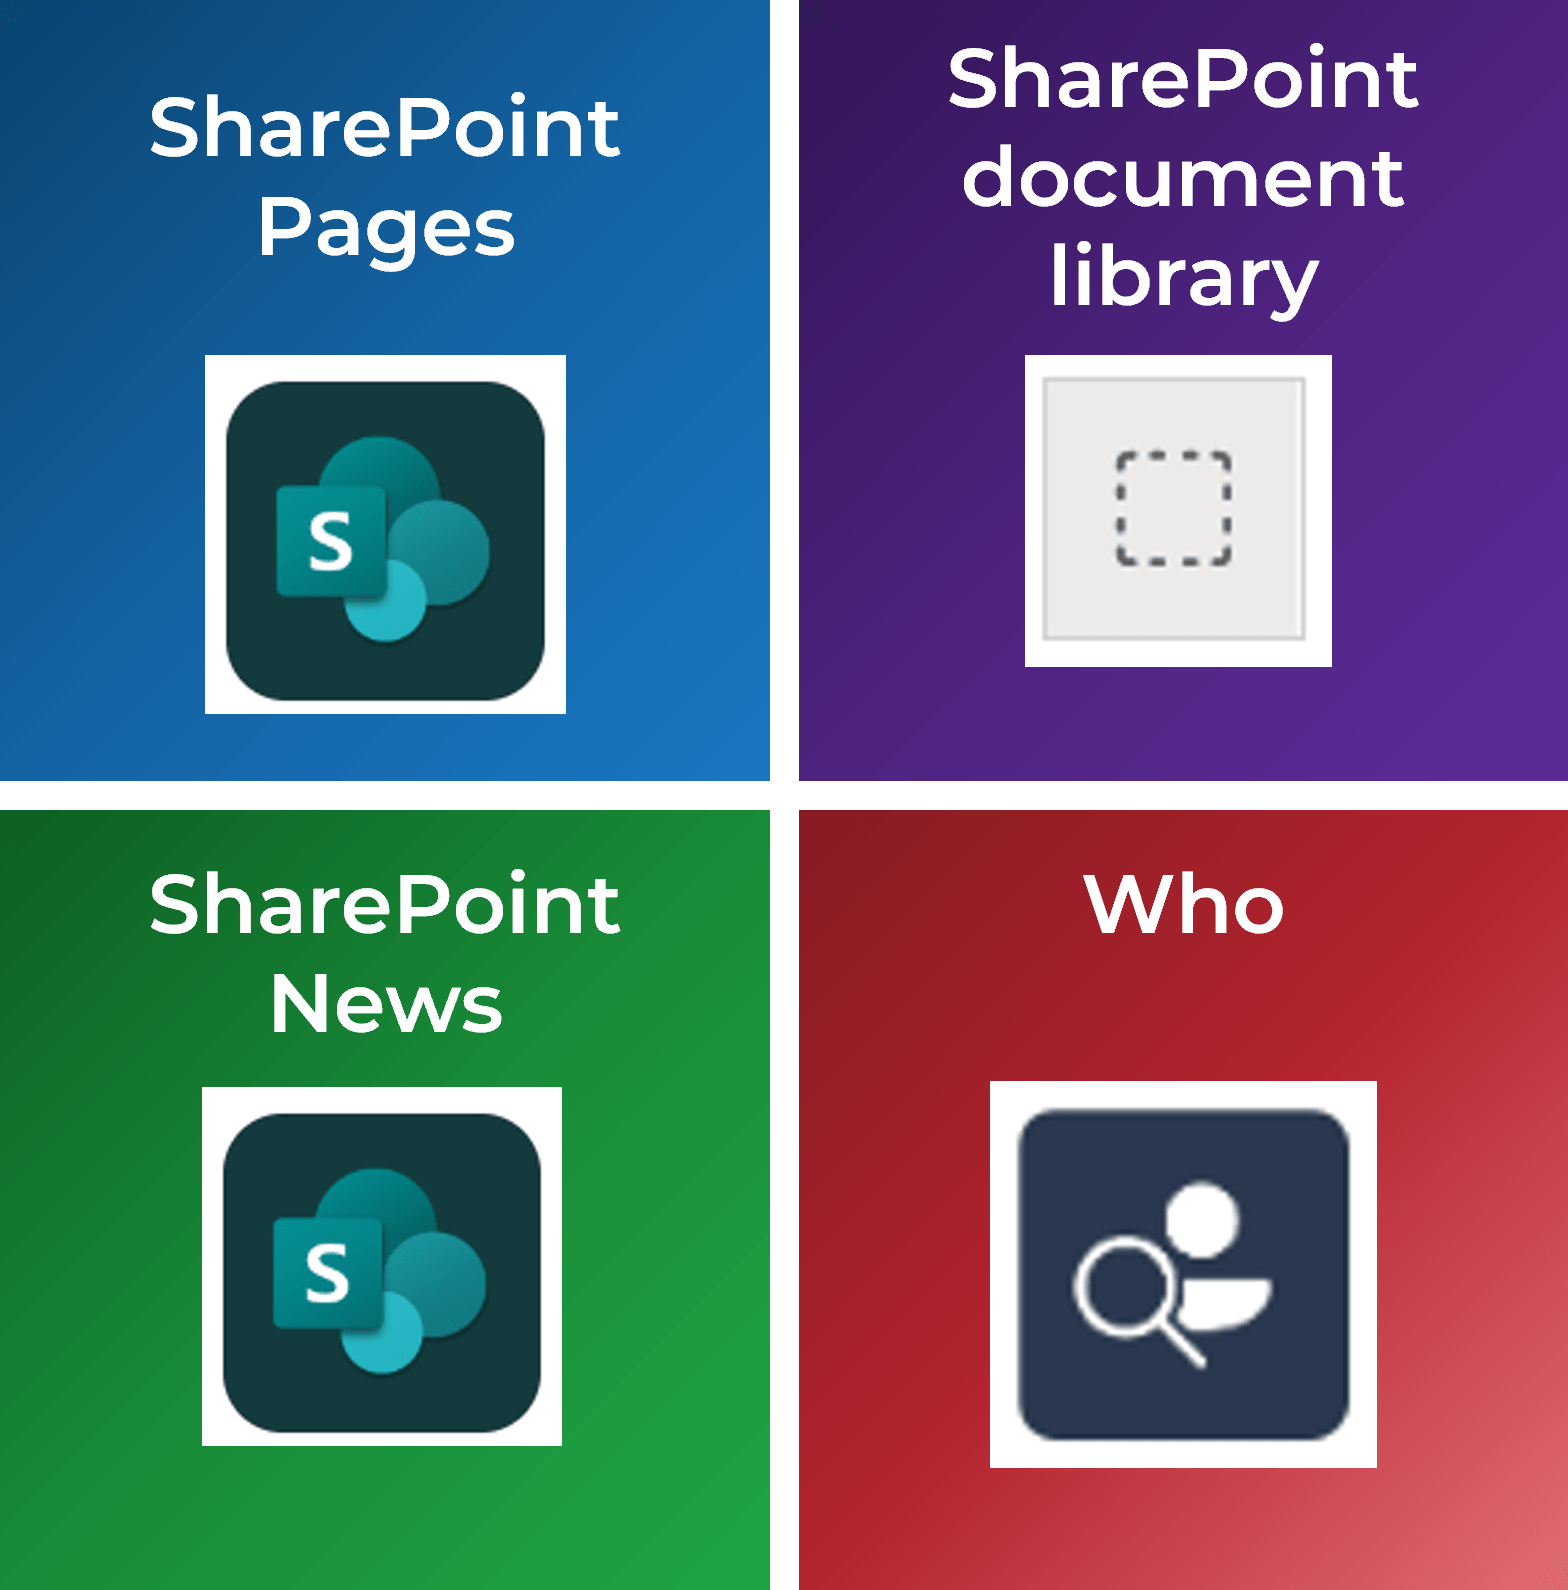 Samples of four features: 'SharePoint Pages', 'SharePoint document library', 'SharePoint News', and 'Who'.